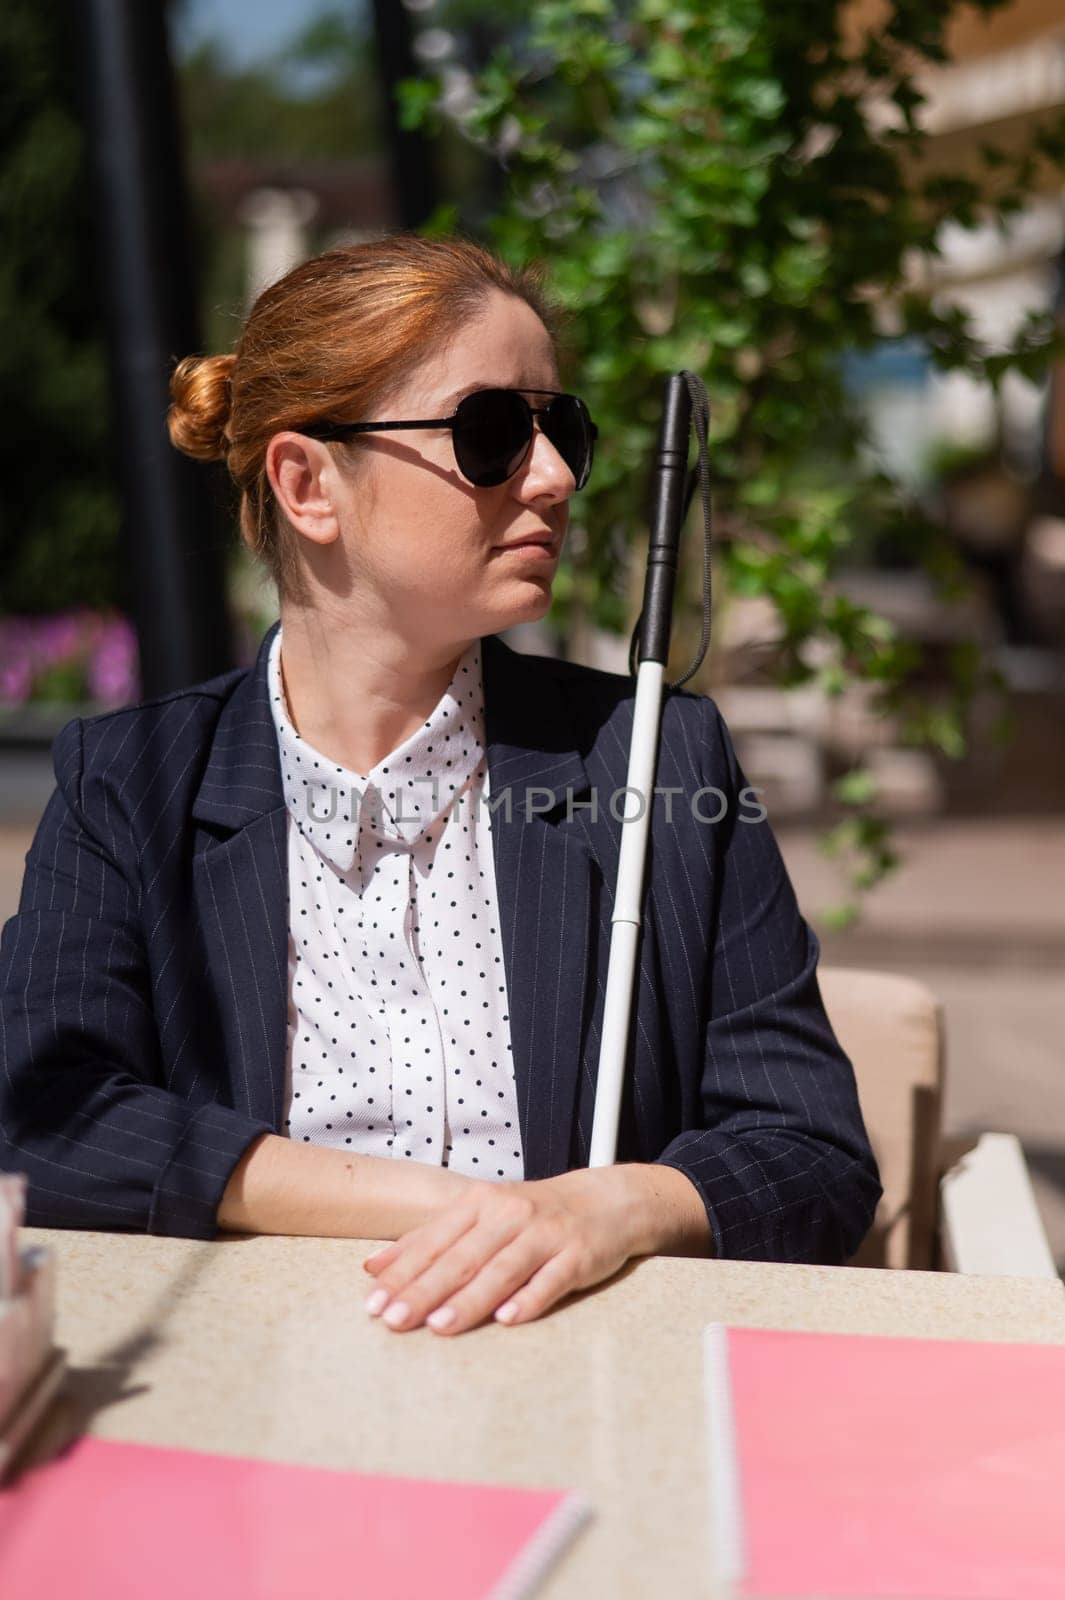 A blind woman in a business suit is sitting in an outdoor cafe